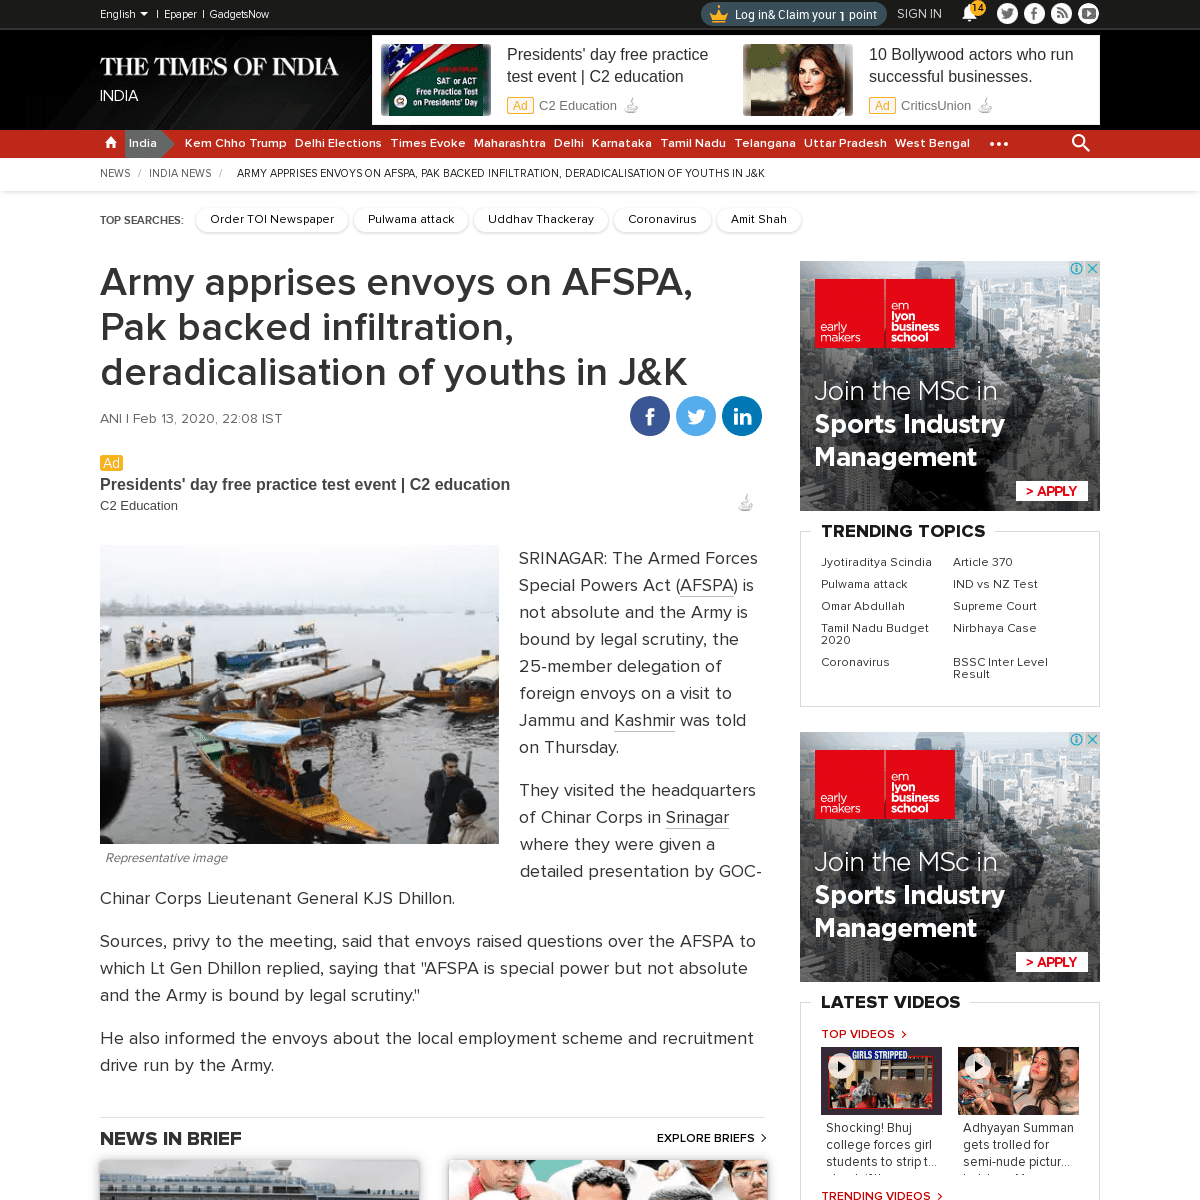 A complete backup of timesofindia.indiatimes.com/india/army-apprises-envoys-on-afspa-pak-backed-infiltration-deradicalisation-of